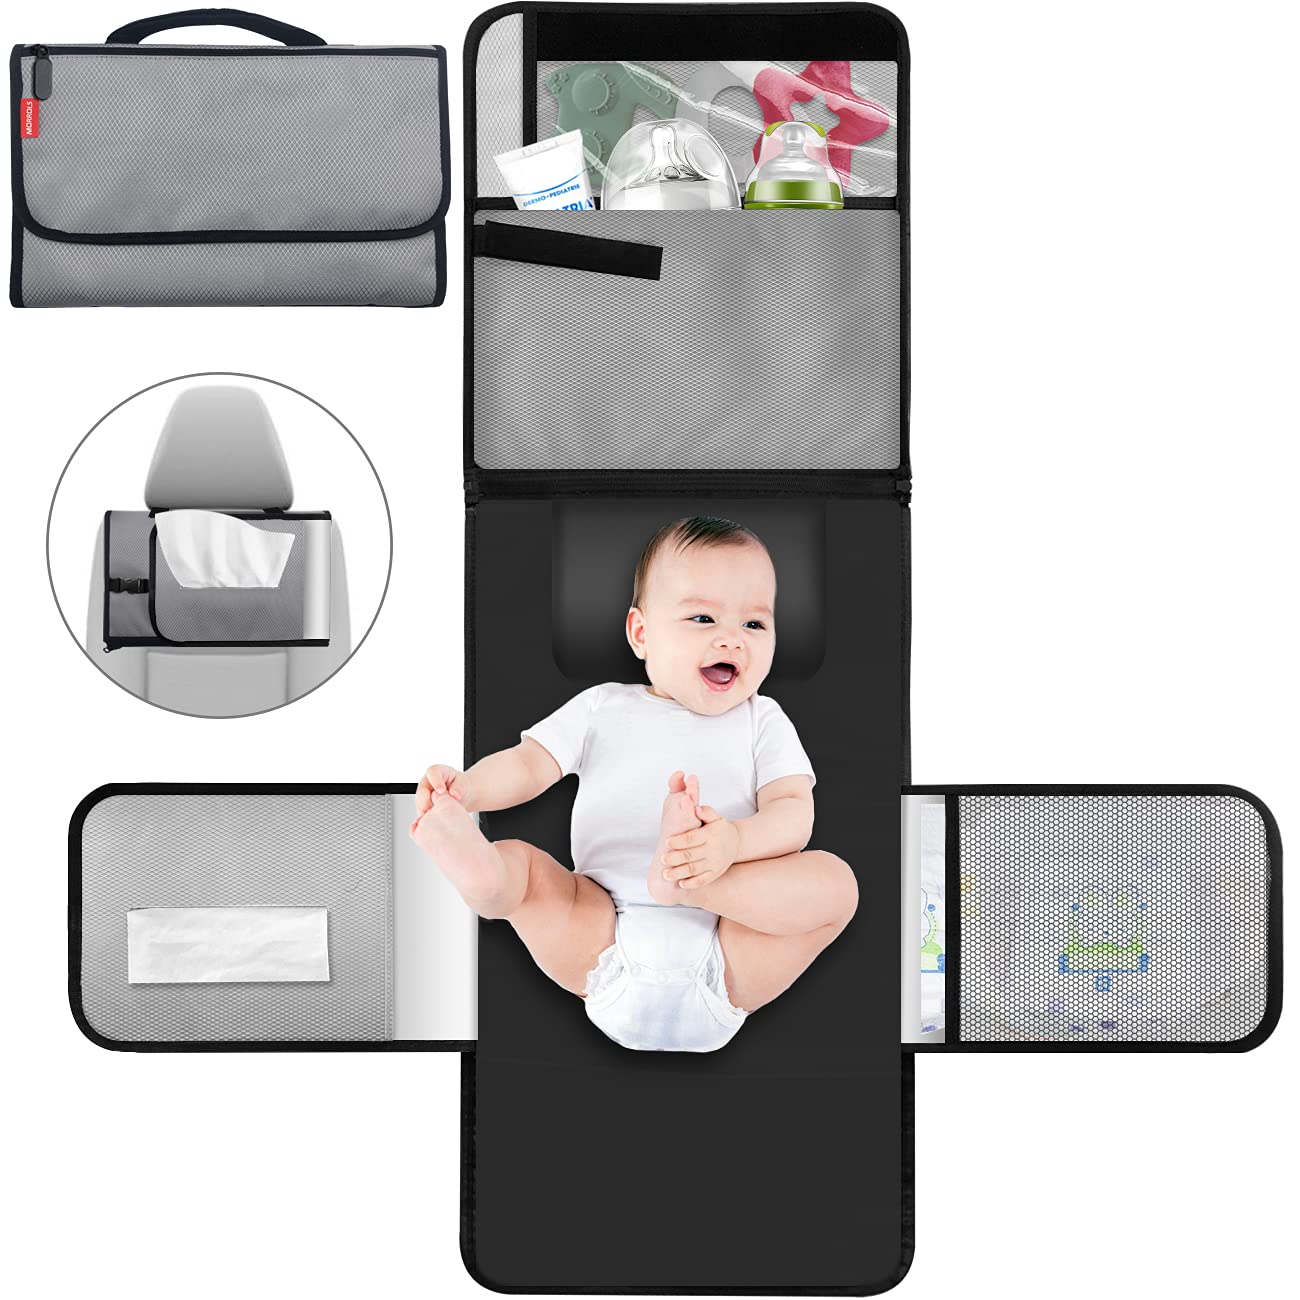 MORROLS Portable Changing Pad - Large Detachable Nappy Travel Changing Mat - Waterproof and Wipeable Diaper Changing mat Portable with Mesh and Zippered Pockets for Boy & Girl Newborns(Dark Gray)